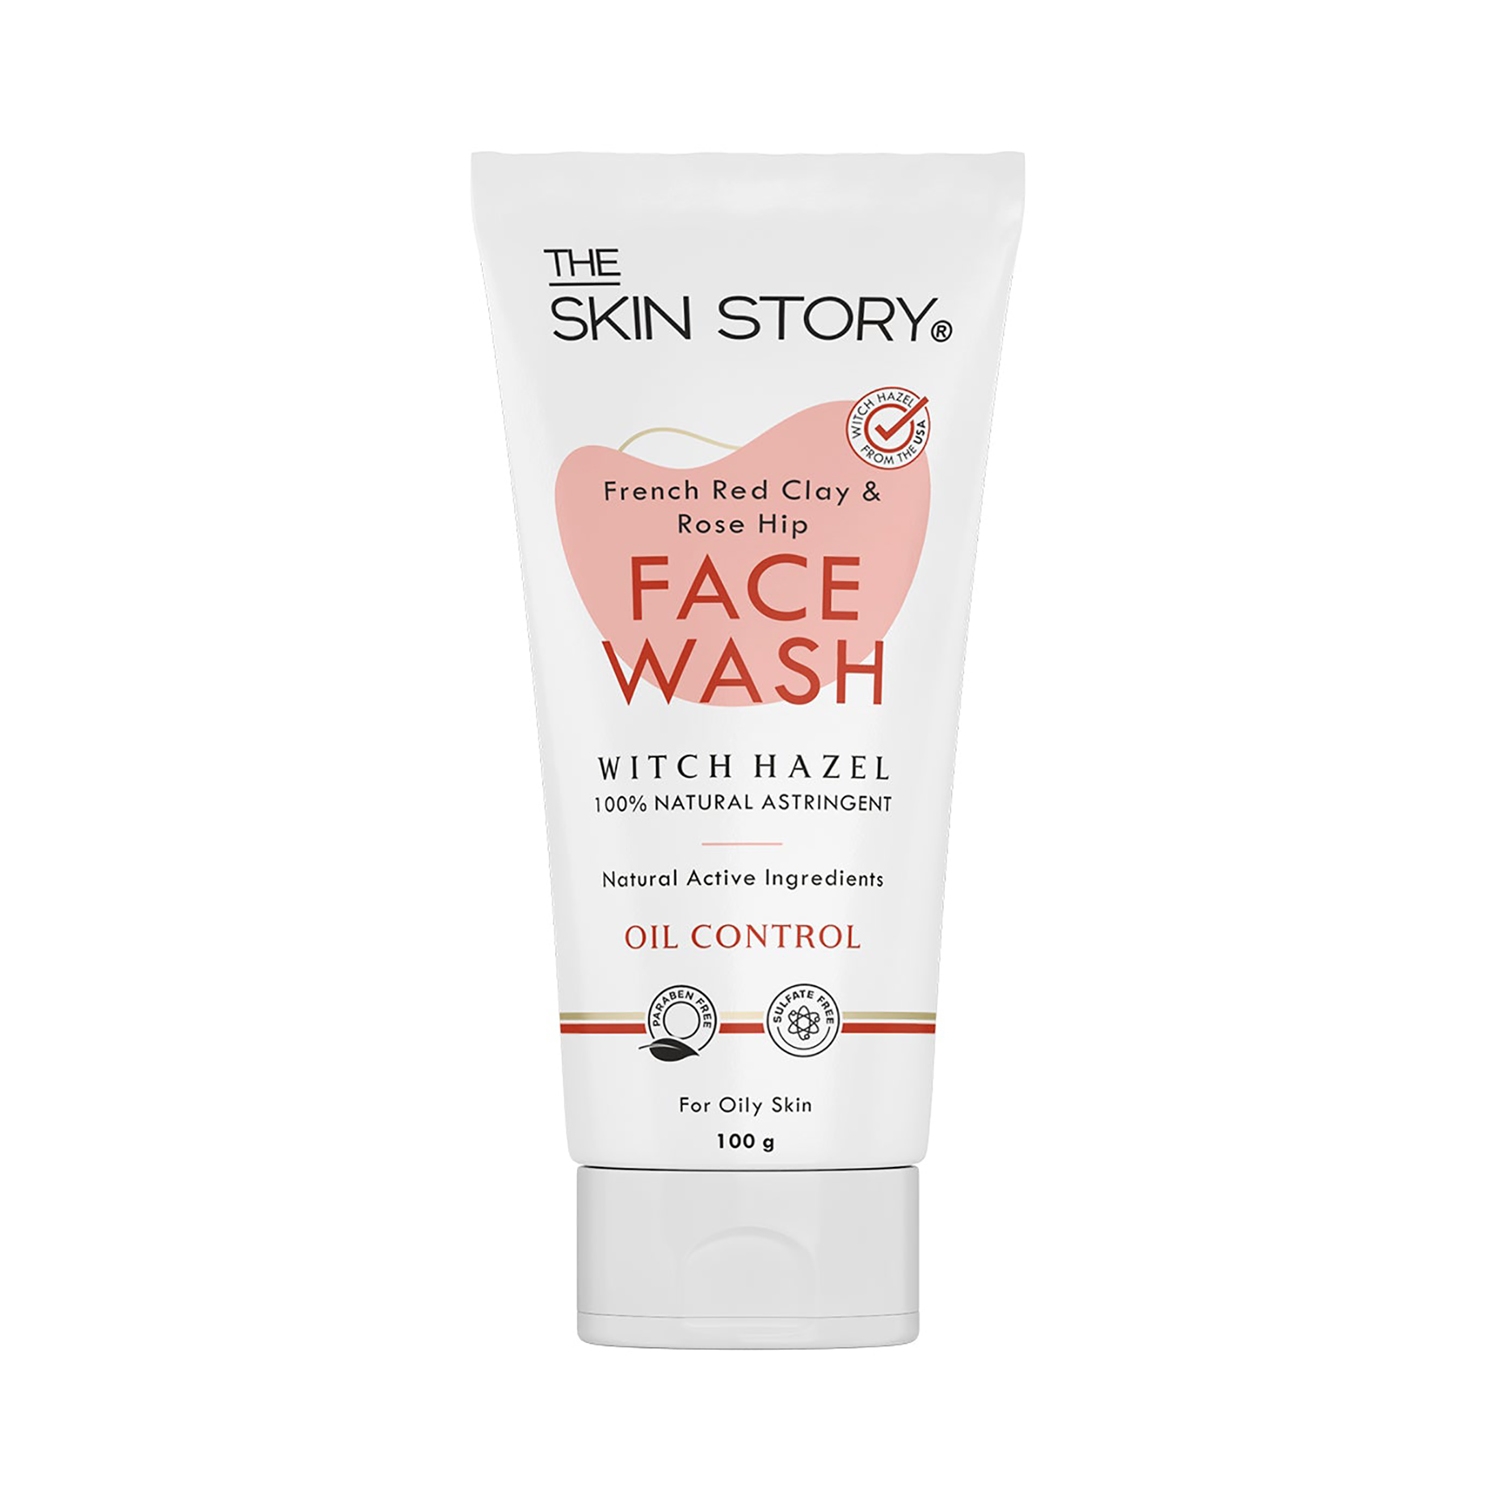 The Skin Story | The Skin Story French Red Clay & Rosehip Facewash (100g)